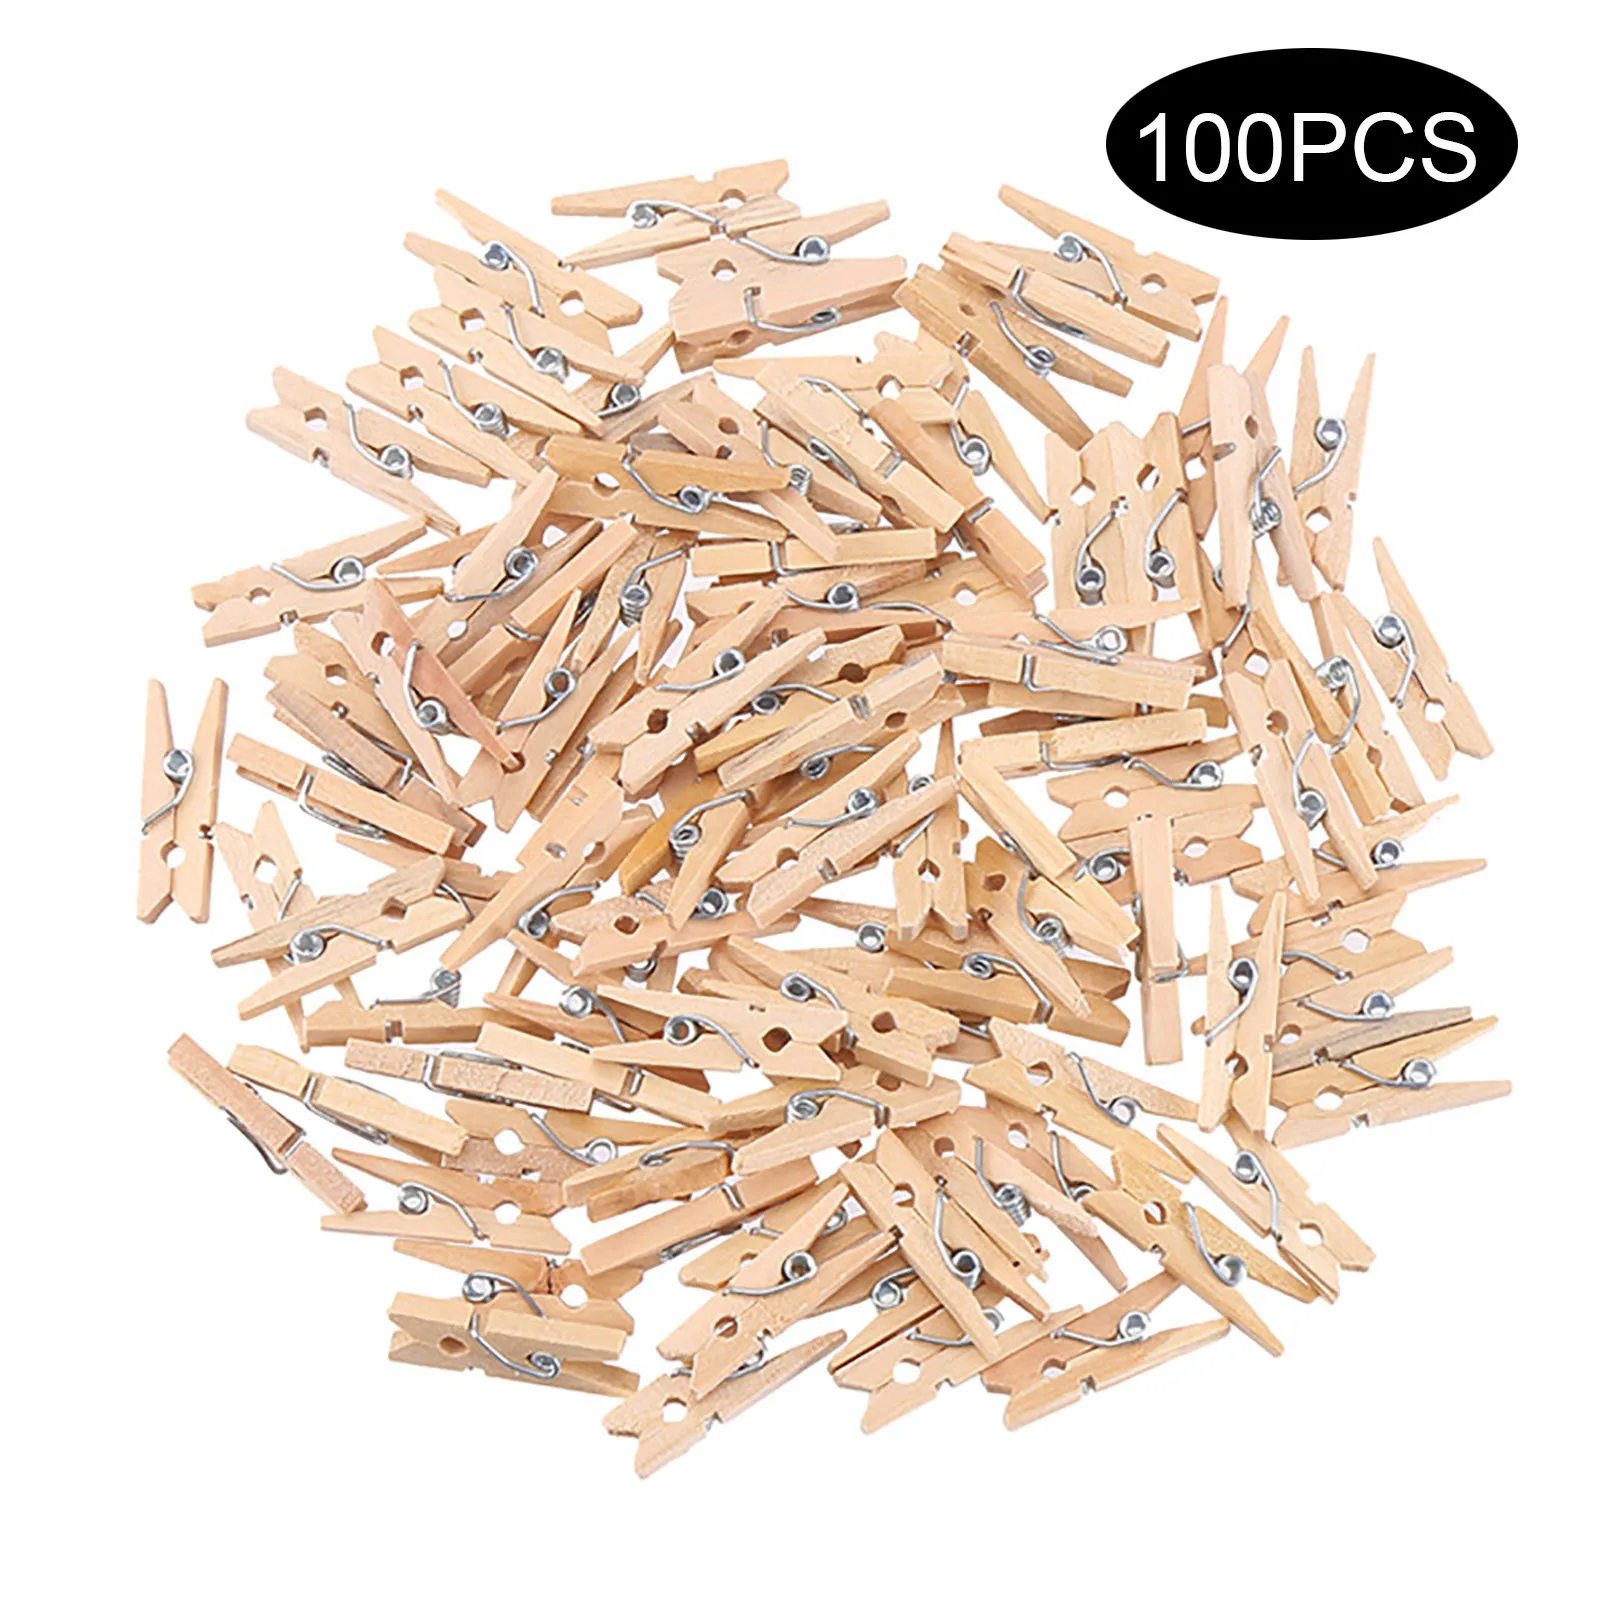 Vosarea 100PCS Clips Pictures Wood Mini Small Paper Clips Clothespin Wedding Cork Board Hanging Photos Painting Artwork Crafts Black 